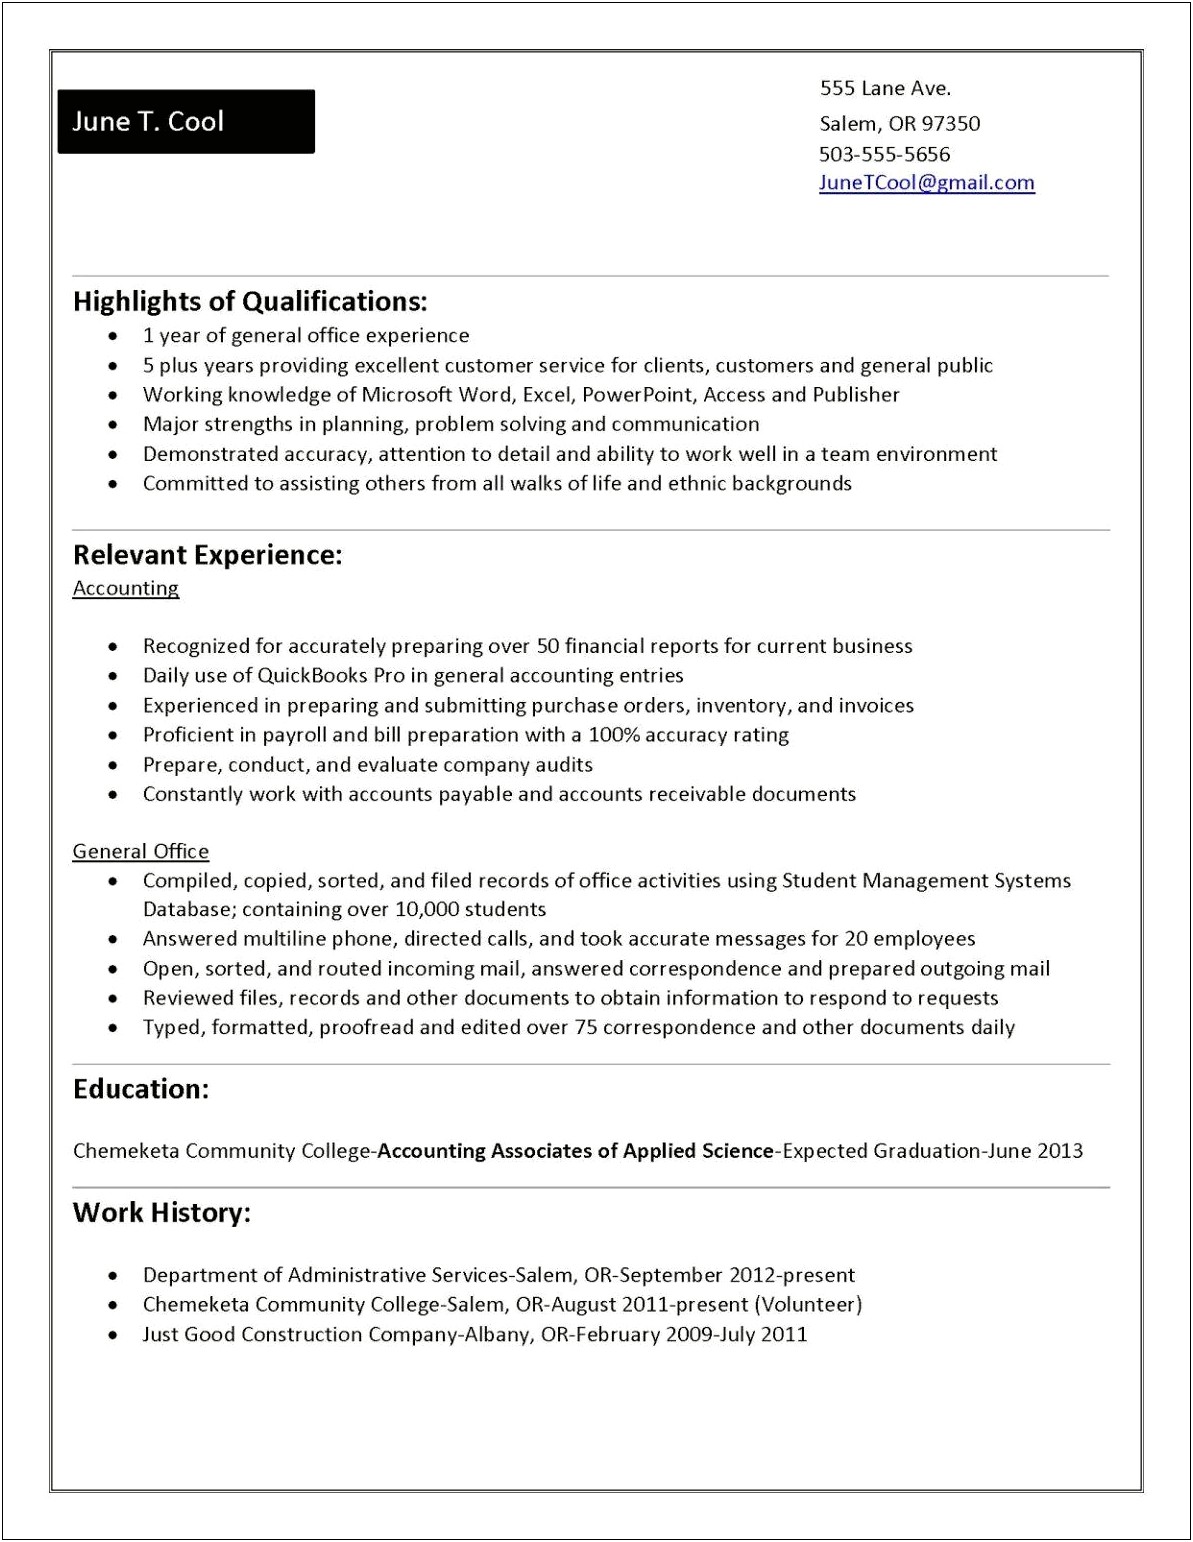 Sample Resume For Construction Bookkeeper